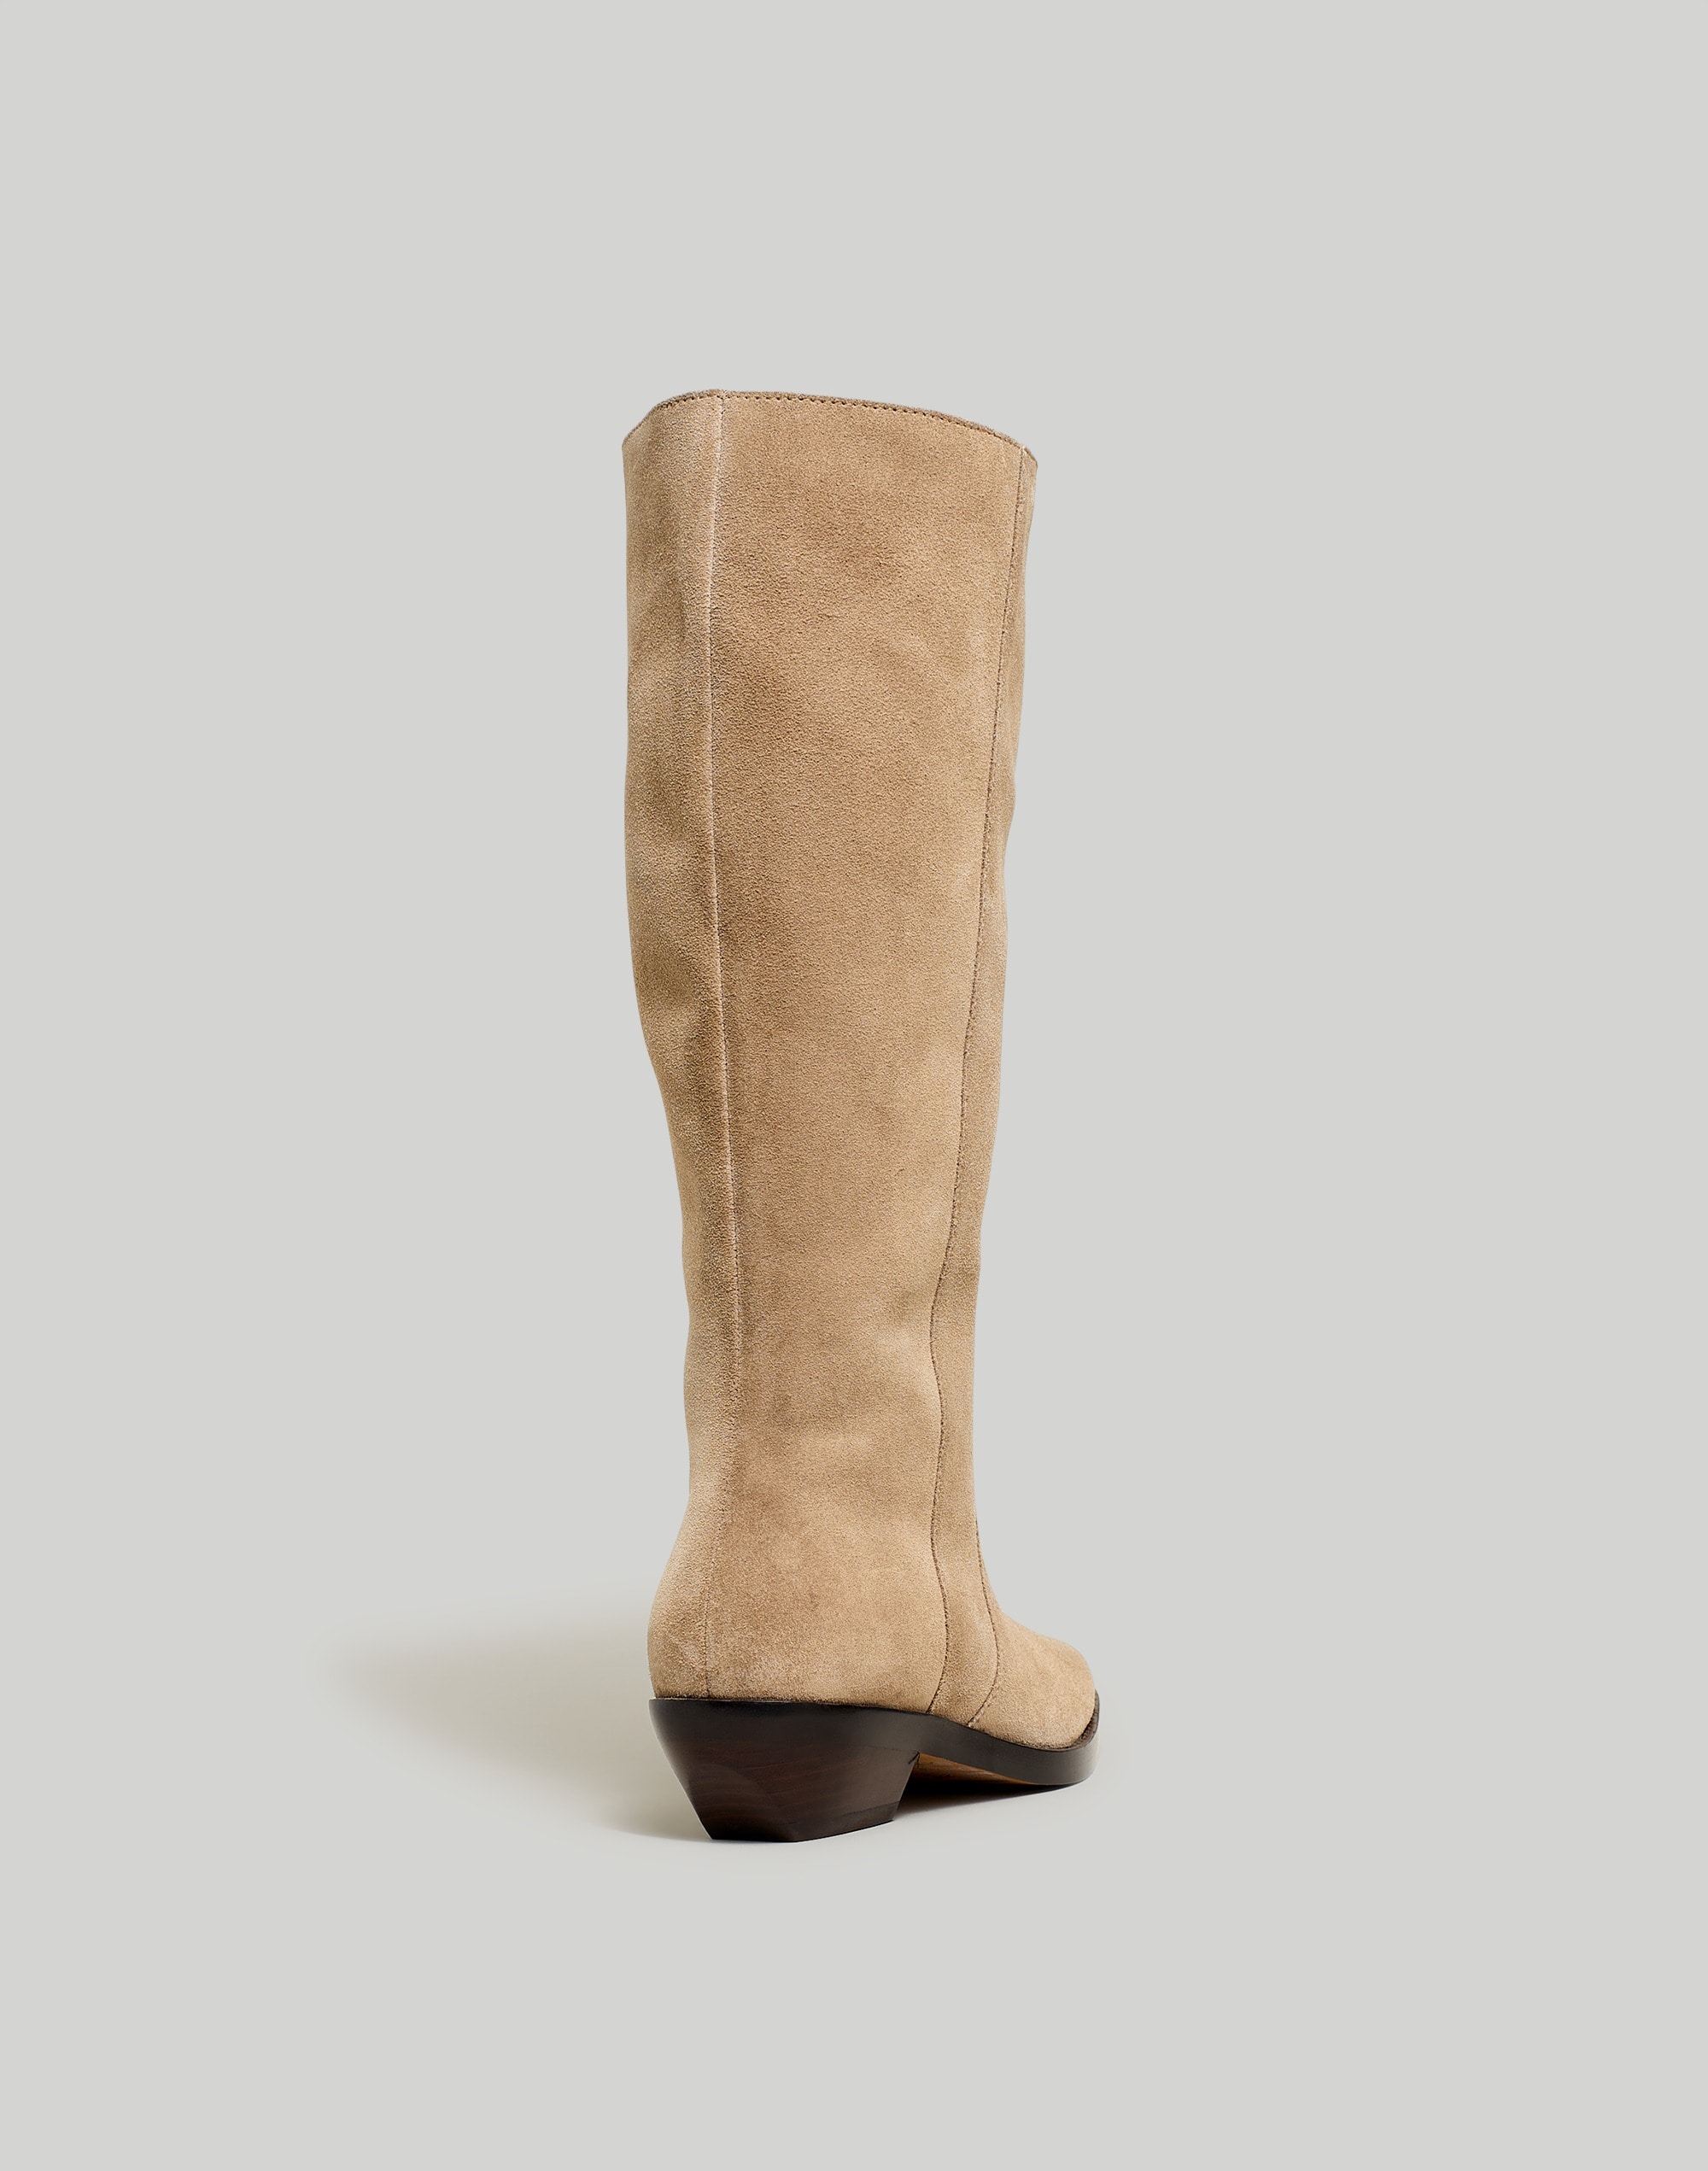 The Antoine Tall Boot with Extended Calf Suede